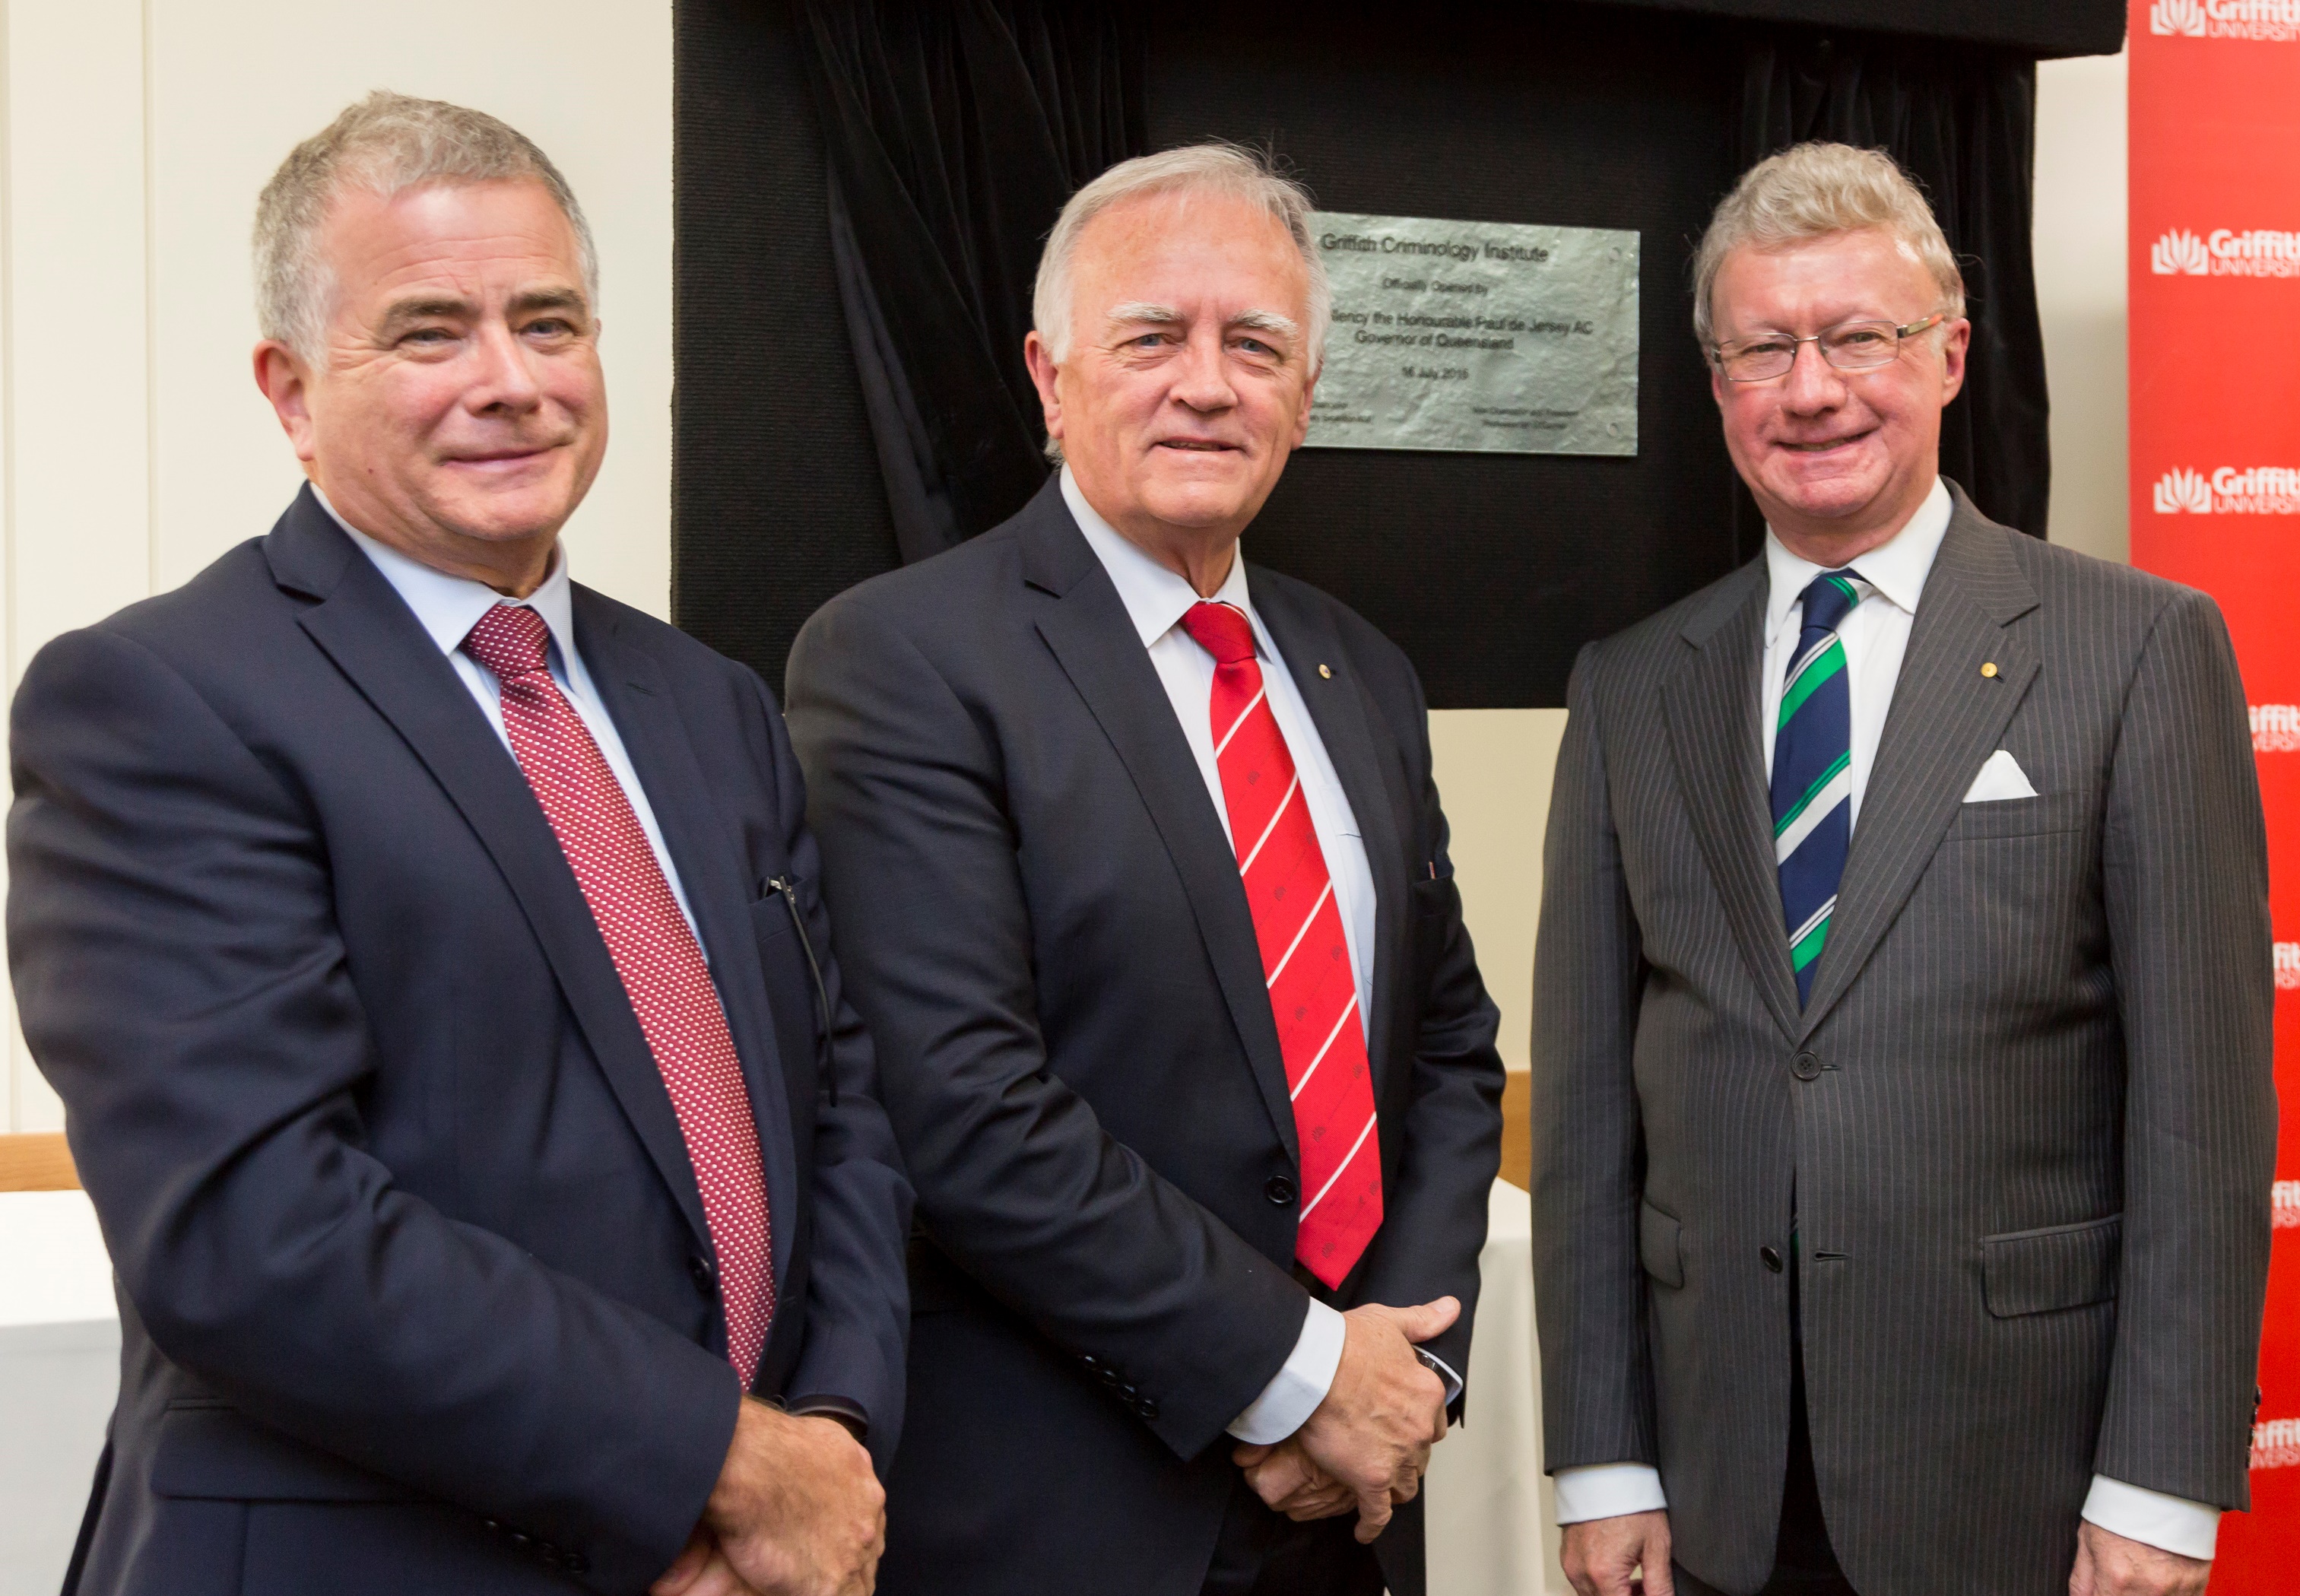 Vice Chancellor Ian O'Connor, Chancellor Henry Smerdon and His Excellency, Paul de Jersey at the opening of the Griffith Criminology Institute.